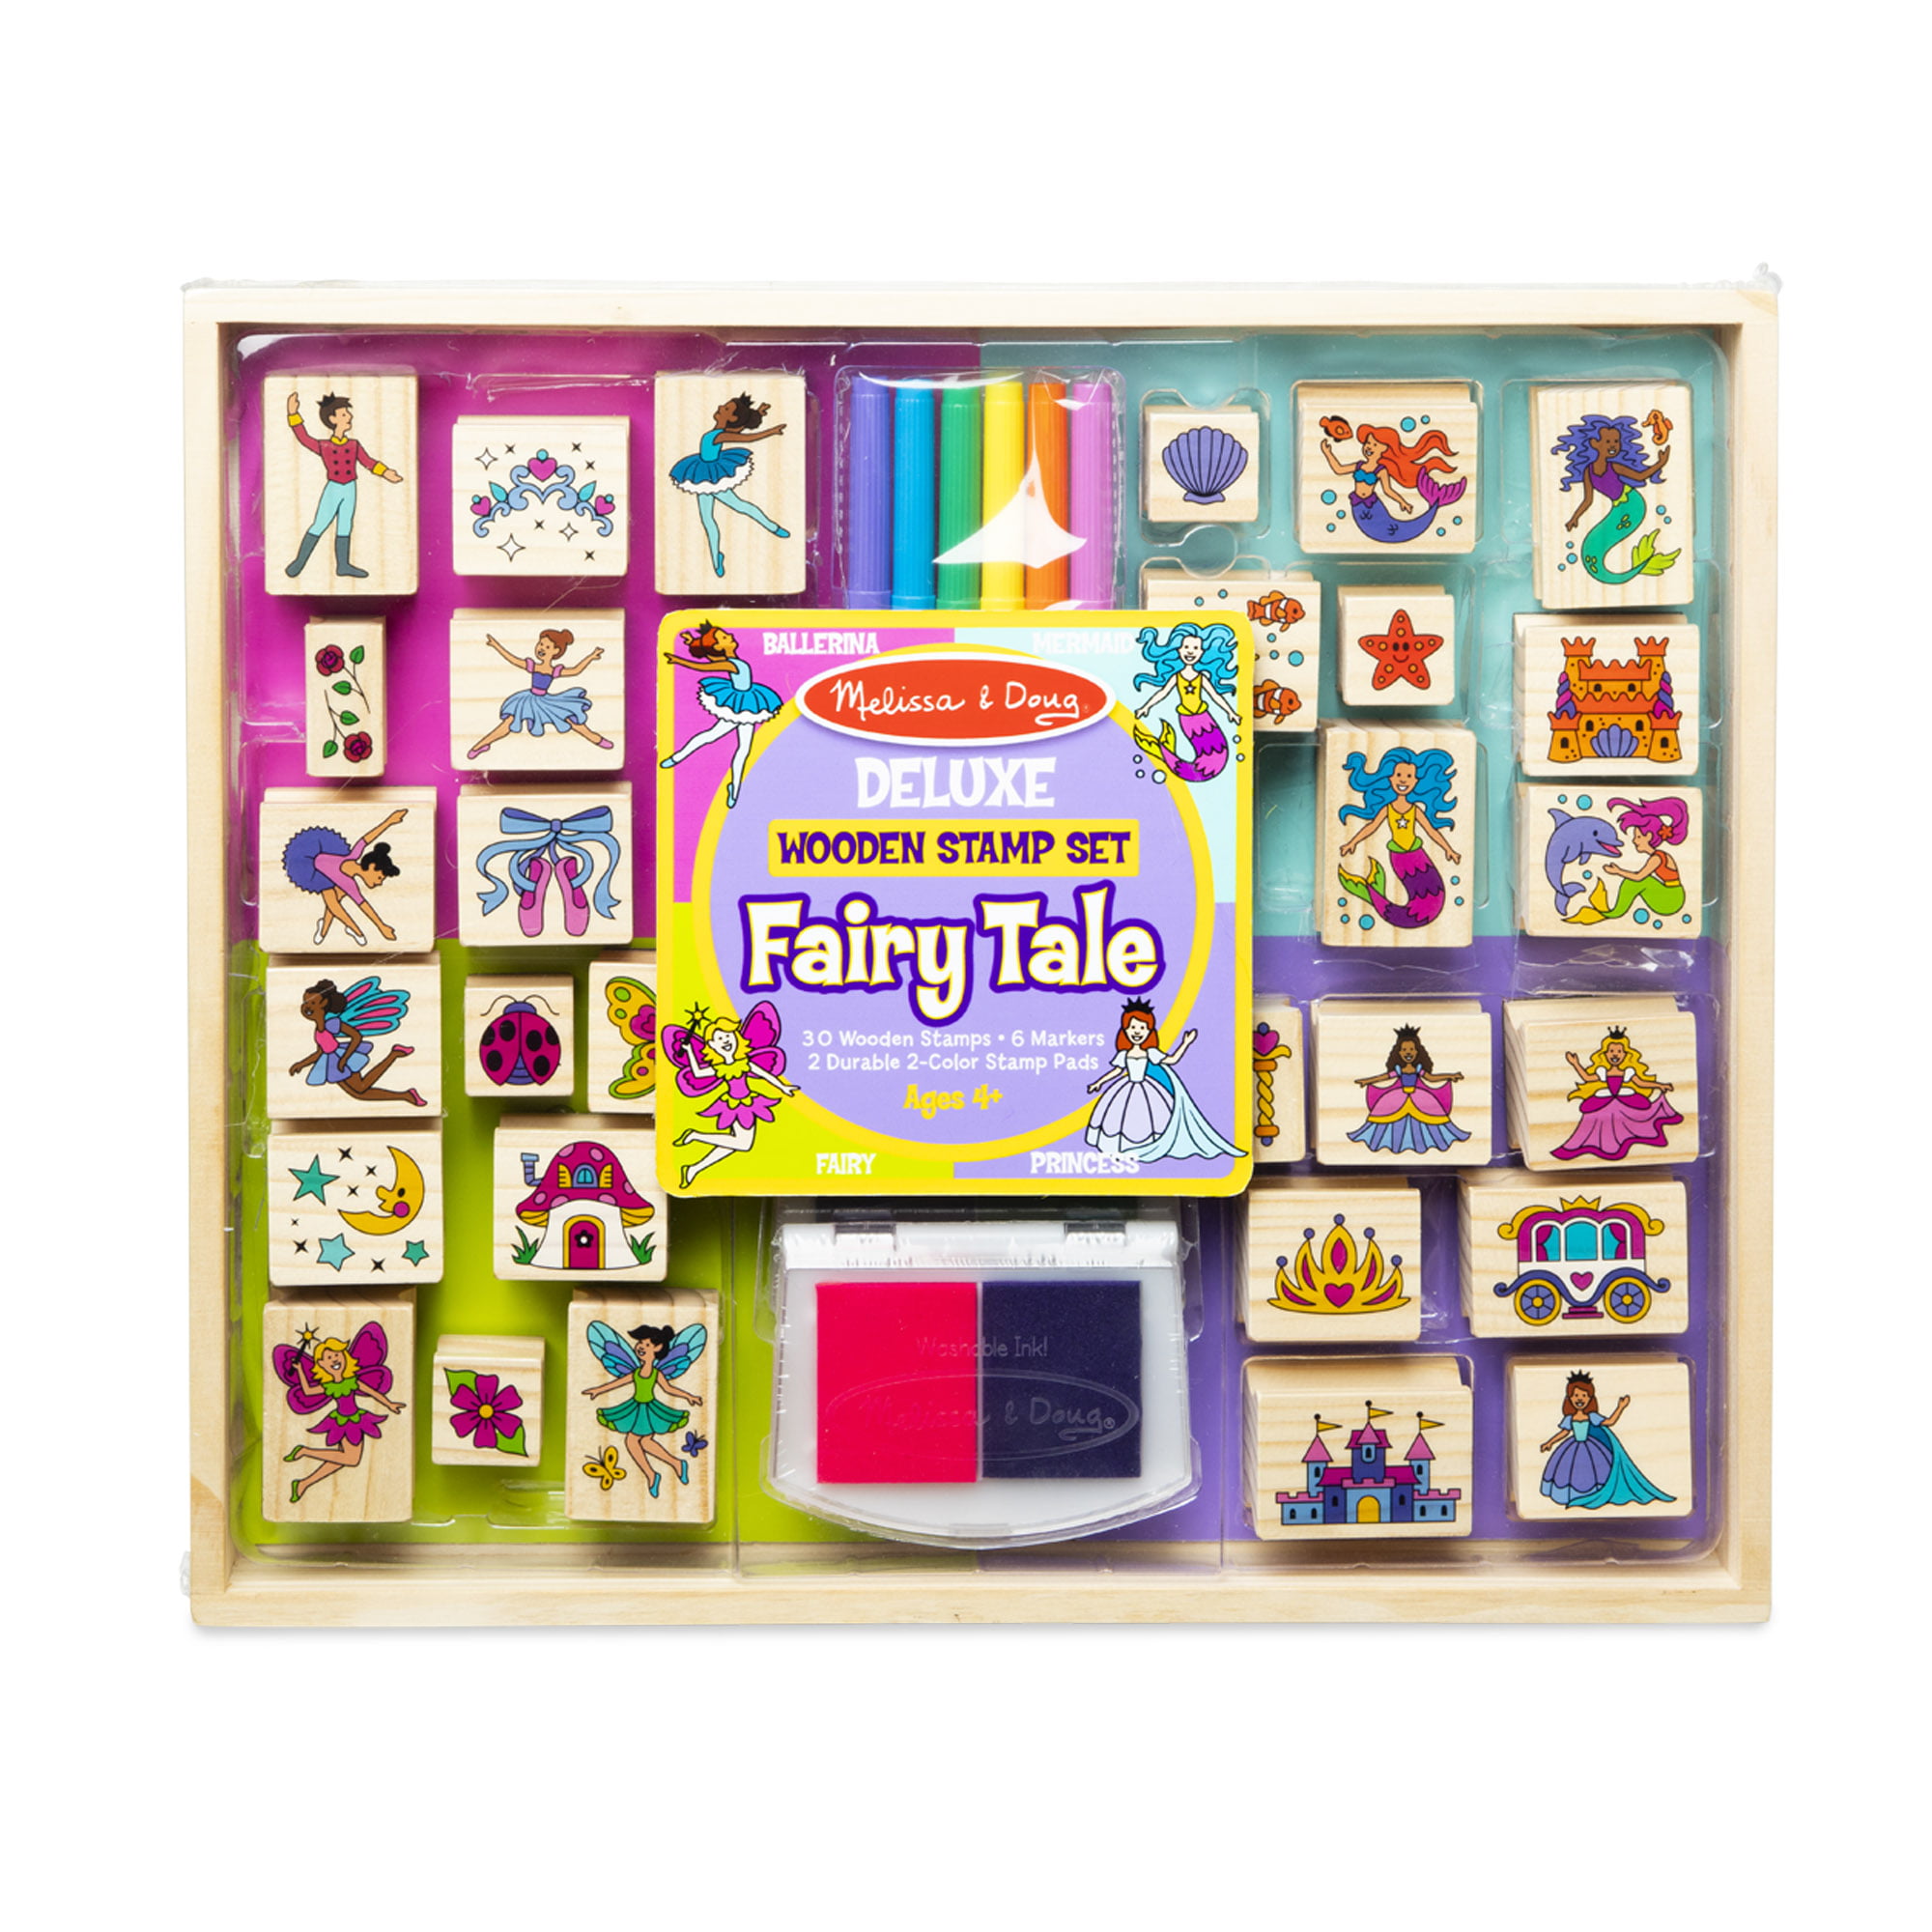 30 Stamps, 6 Markers, 2 Durable 2-Color Stamp Pads Fairy Tale Melissa & Doug Deluxe Wooden Stamp and Coloring Set